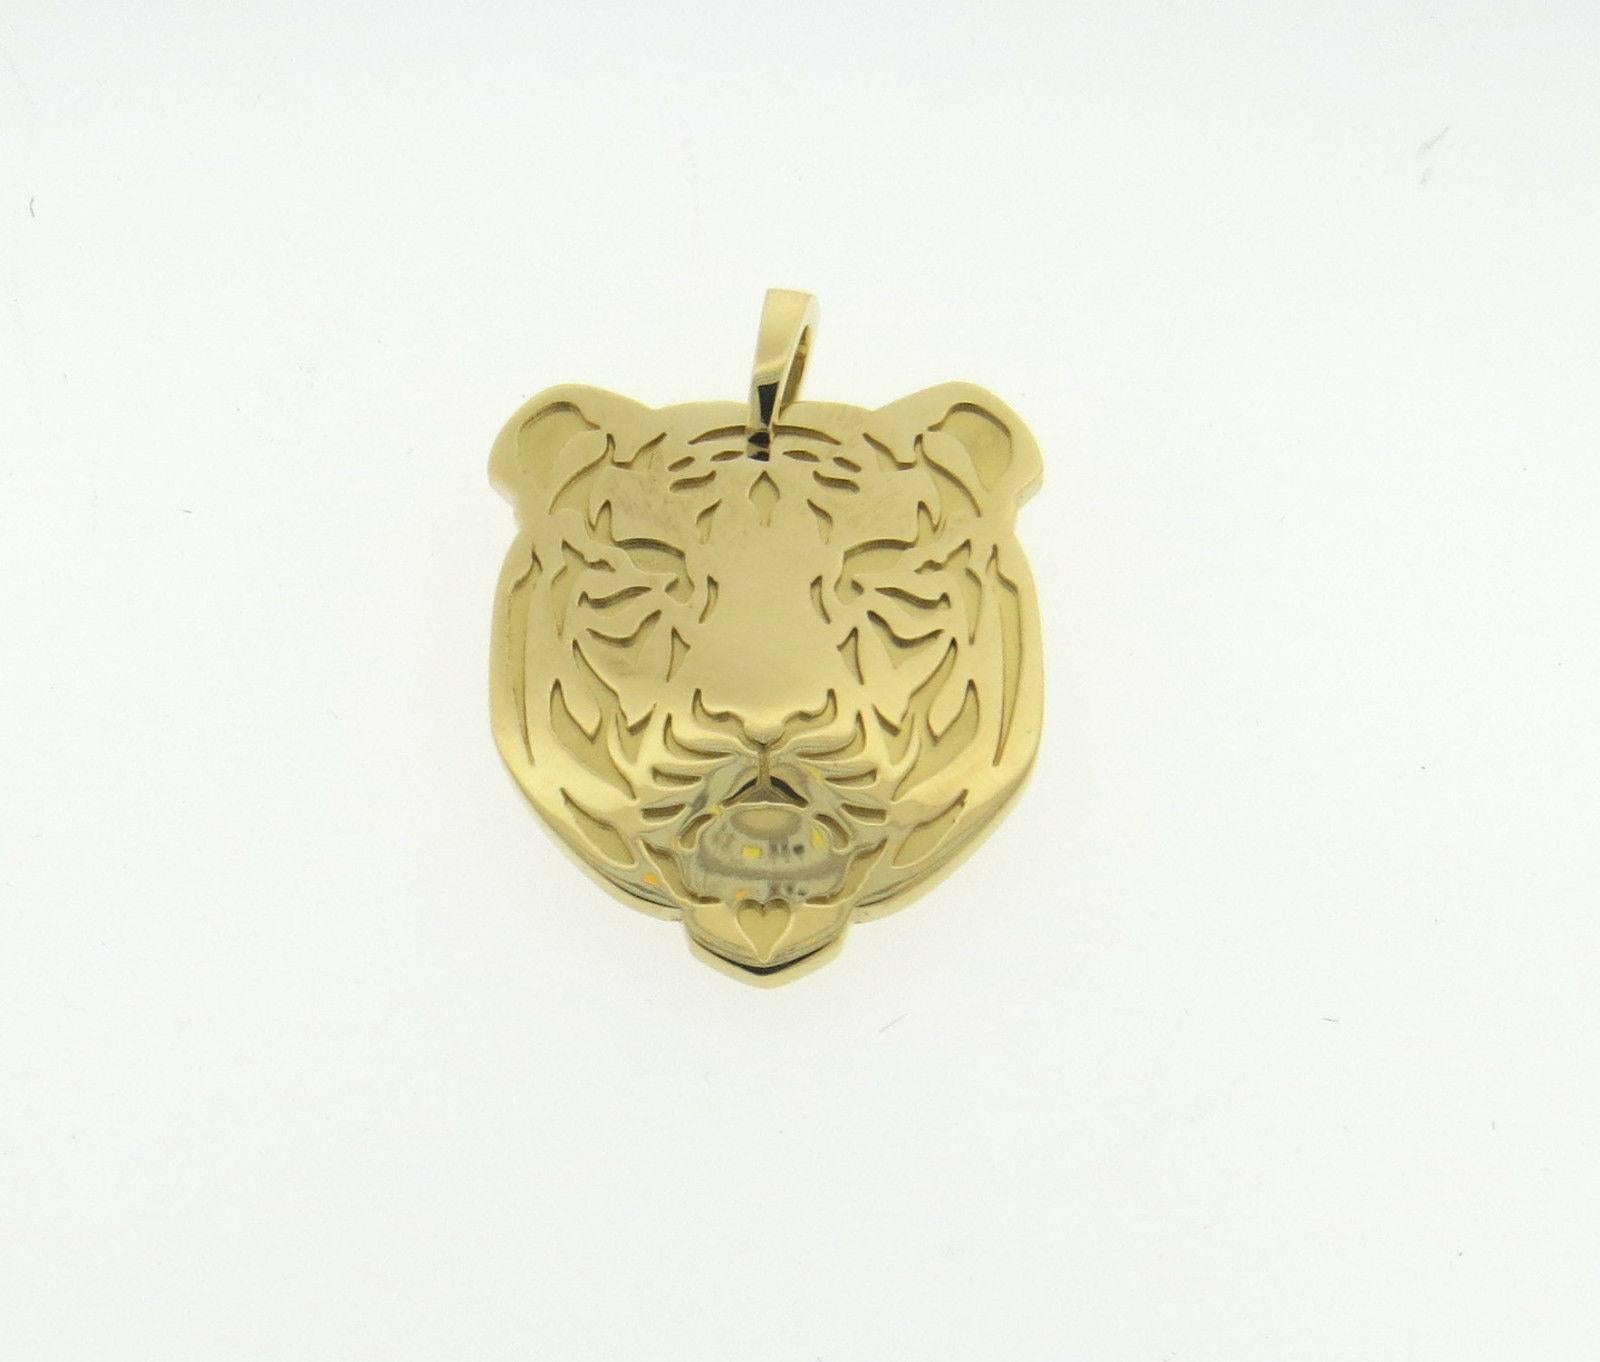 18k yellow gold pendant, crafted by Carrera Y Carrera, featuring tiger head. Pendant is 36mm with bale x 26mm. Marked: CC mark, 750, 412189. Weight of the piece - 14.8 grams 